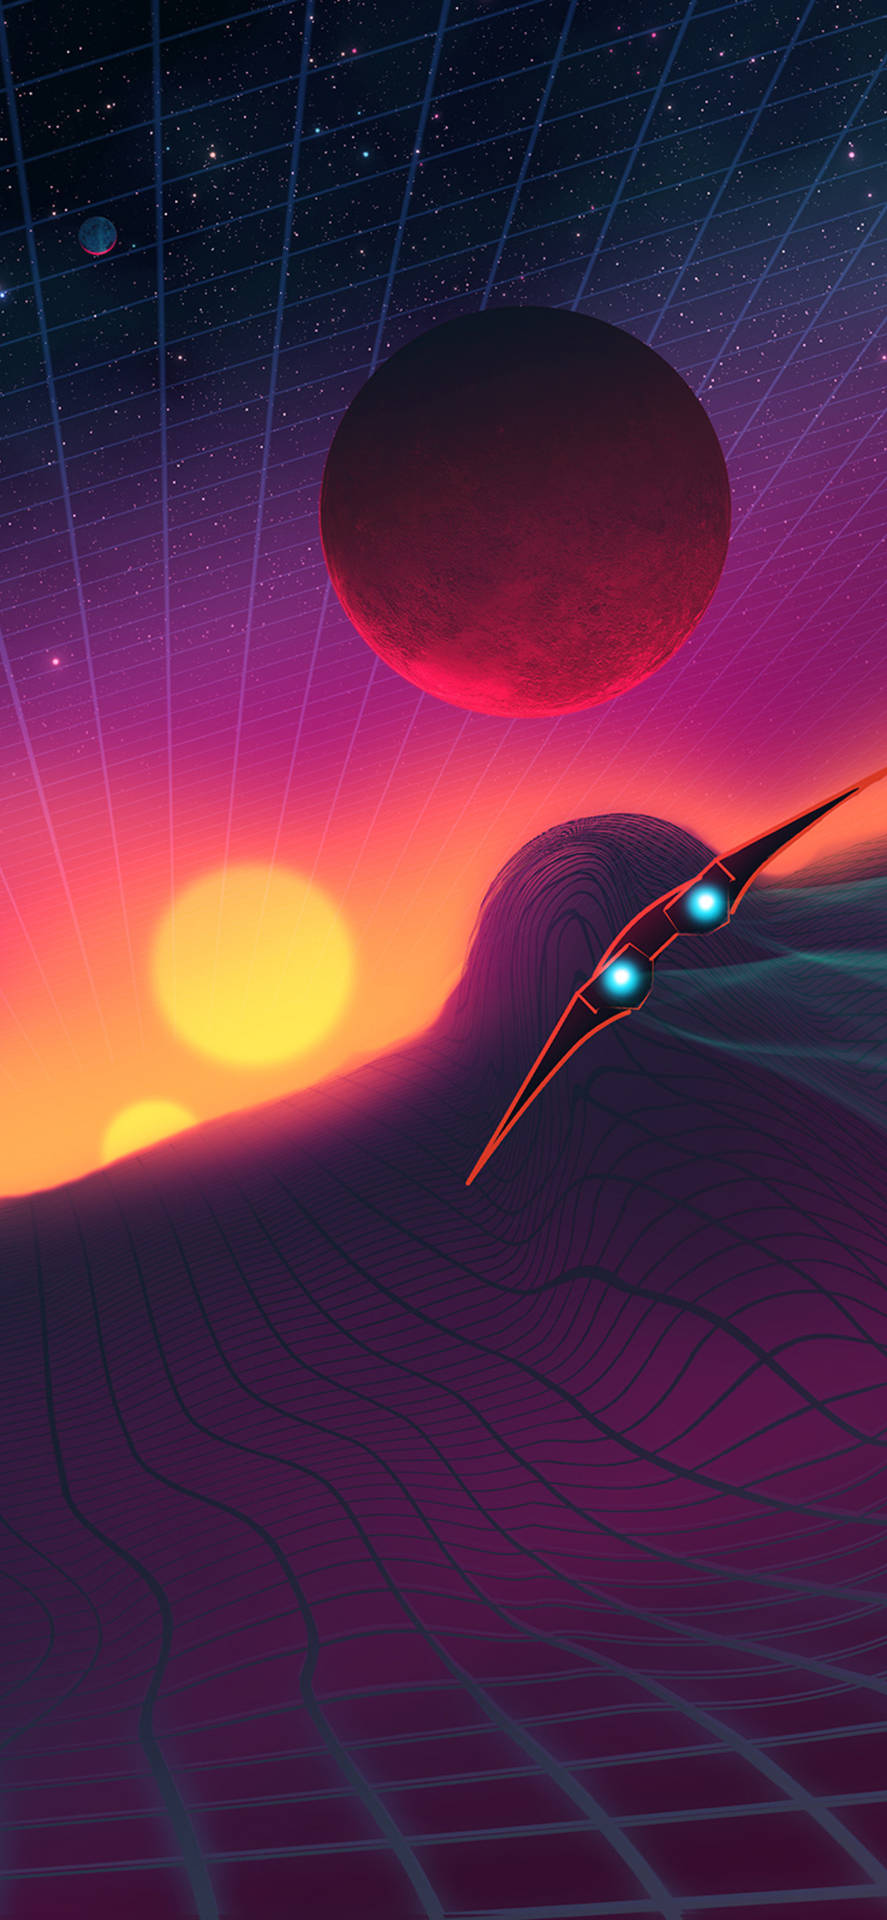 An out-of-this-world vision of retro space Wallpaper